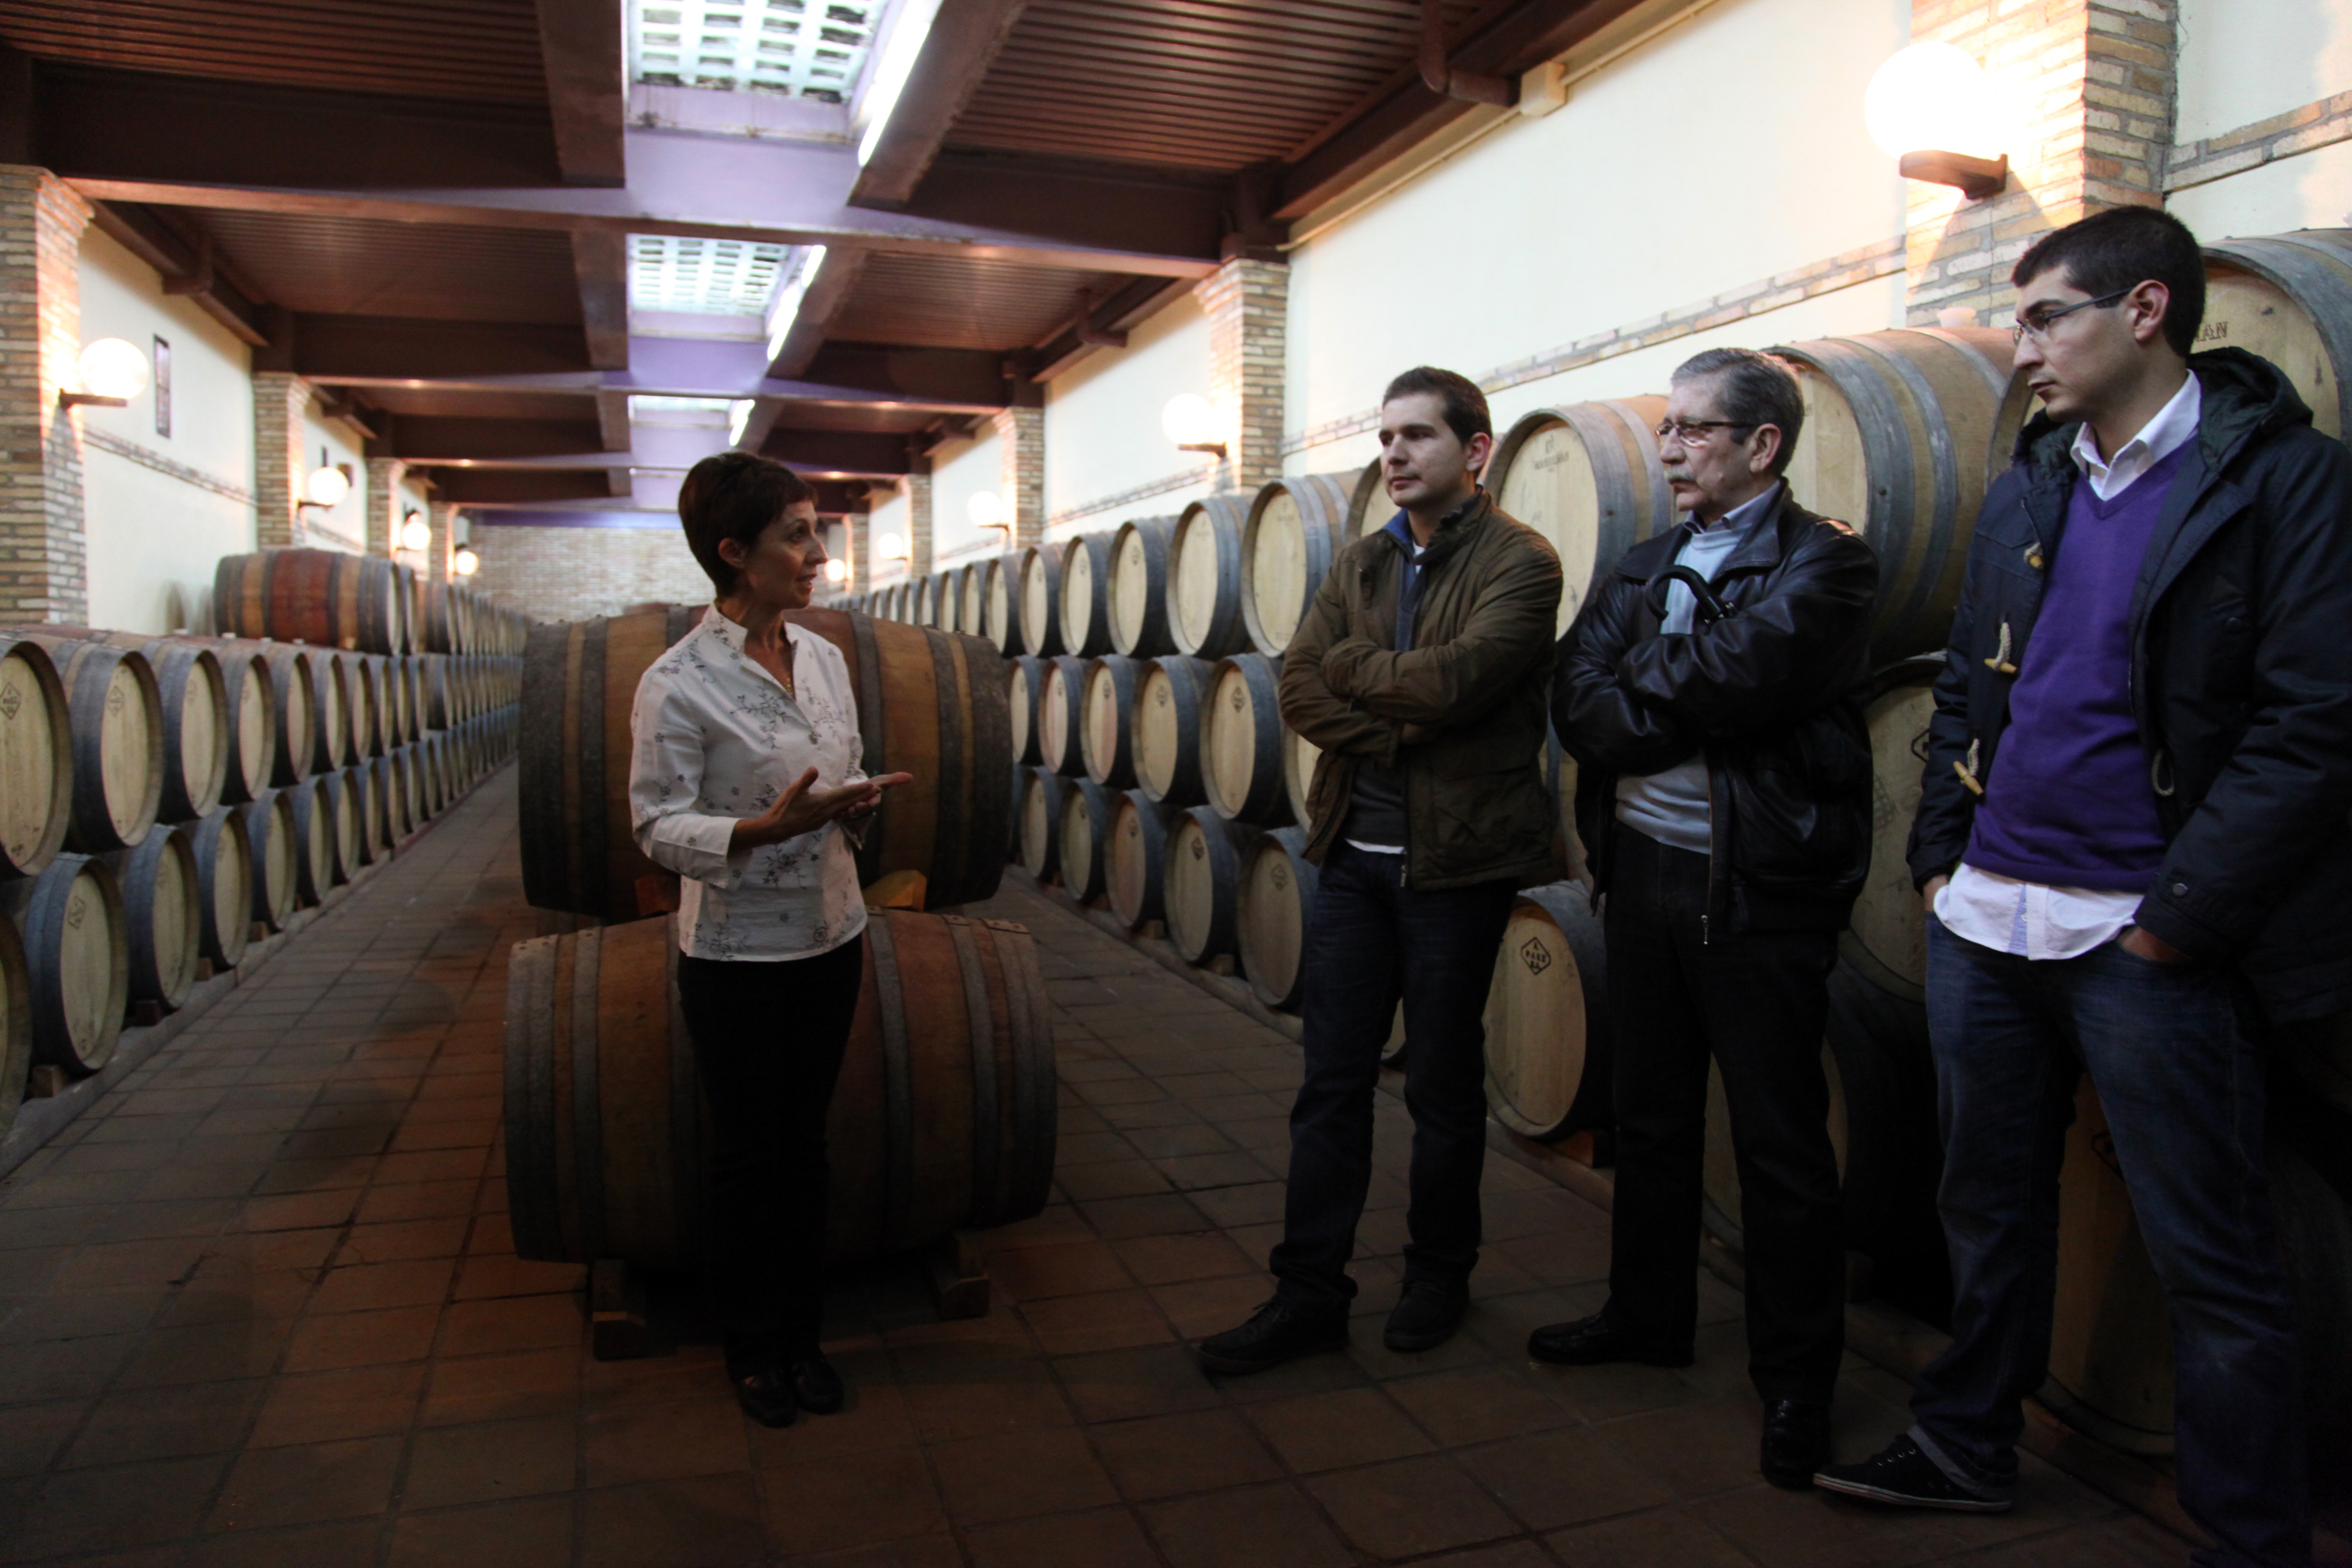 Tour of the winery: men could be great listeners when wine is concerned. Photo by Zlata Rodionova